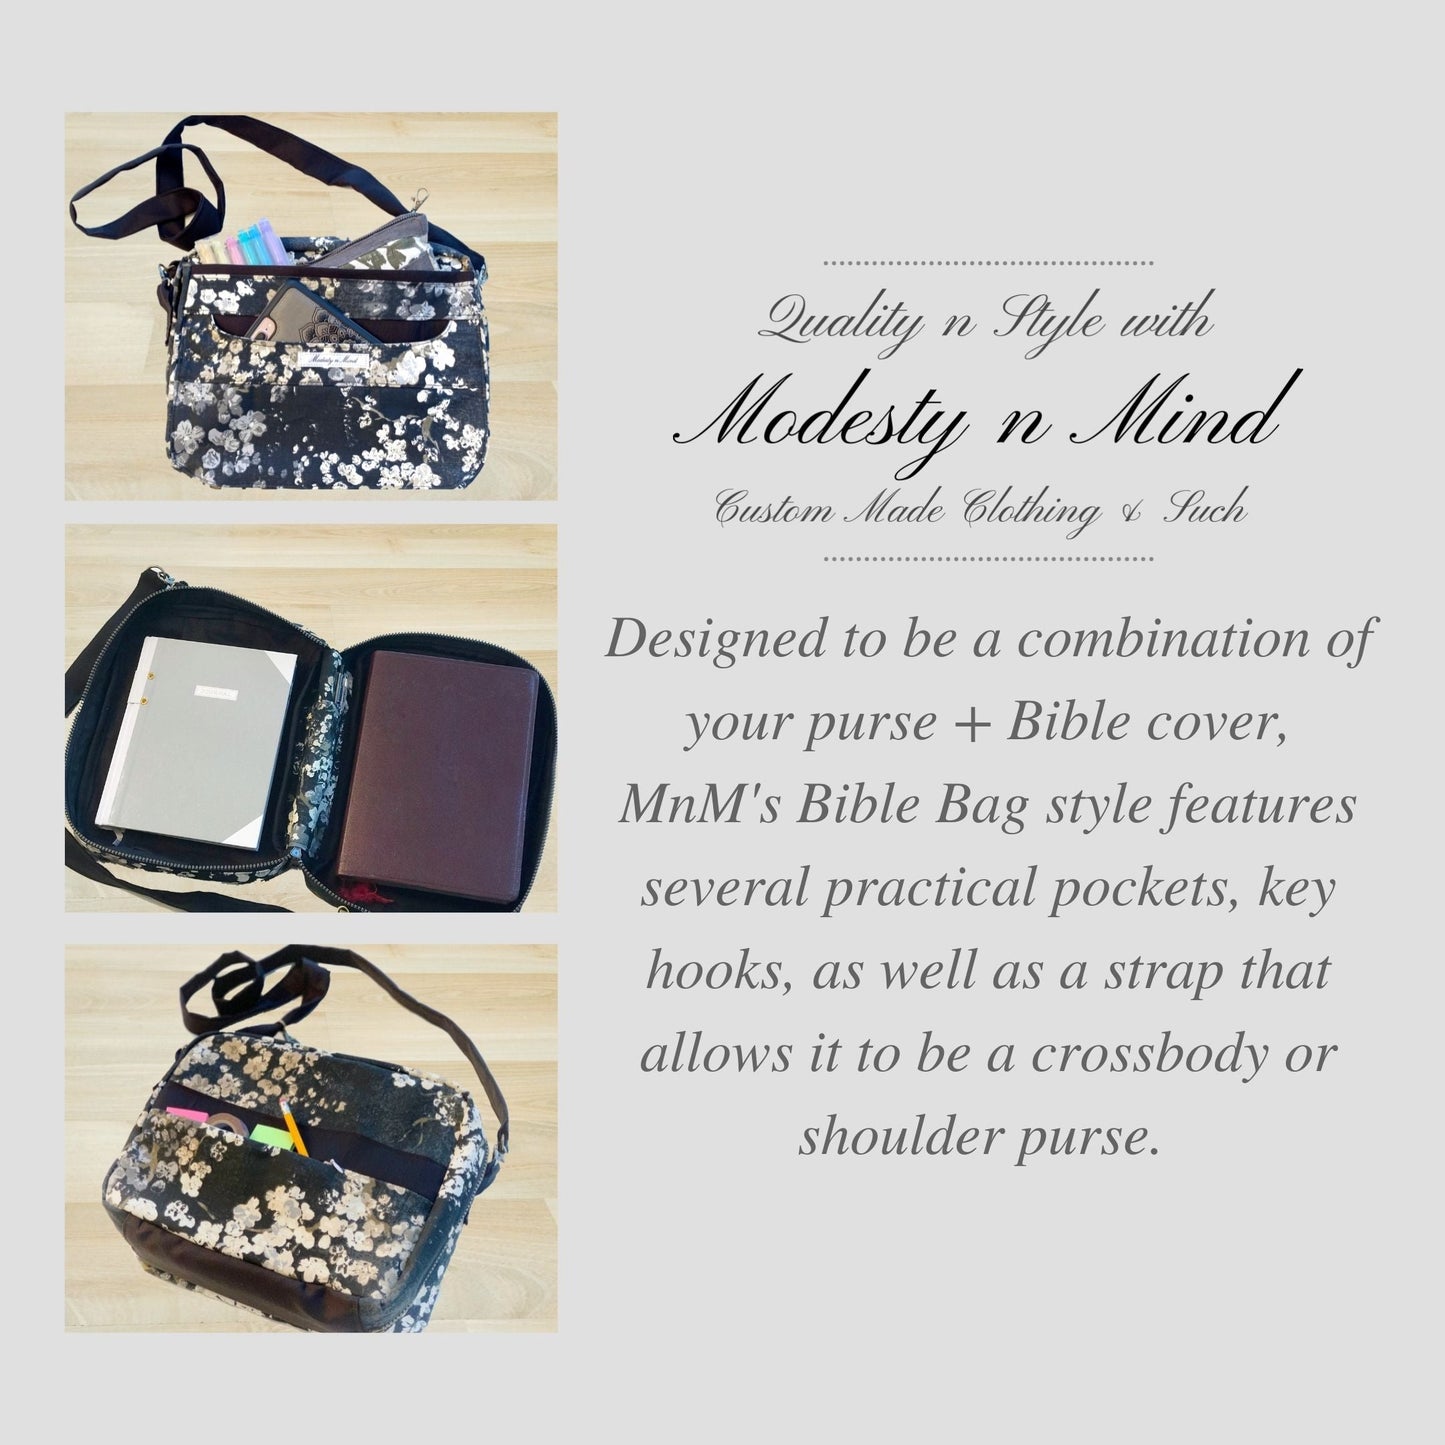 Modesty n Mind graphic for the Bible Bag: Designed to be a combination of your purse & Bible cover, the bag style features practical pockets, key hooks, as well as a strap that allows it to be a crossbody or shoulder purse